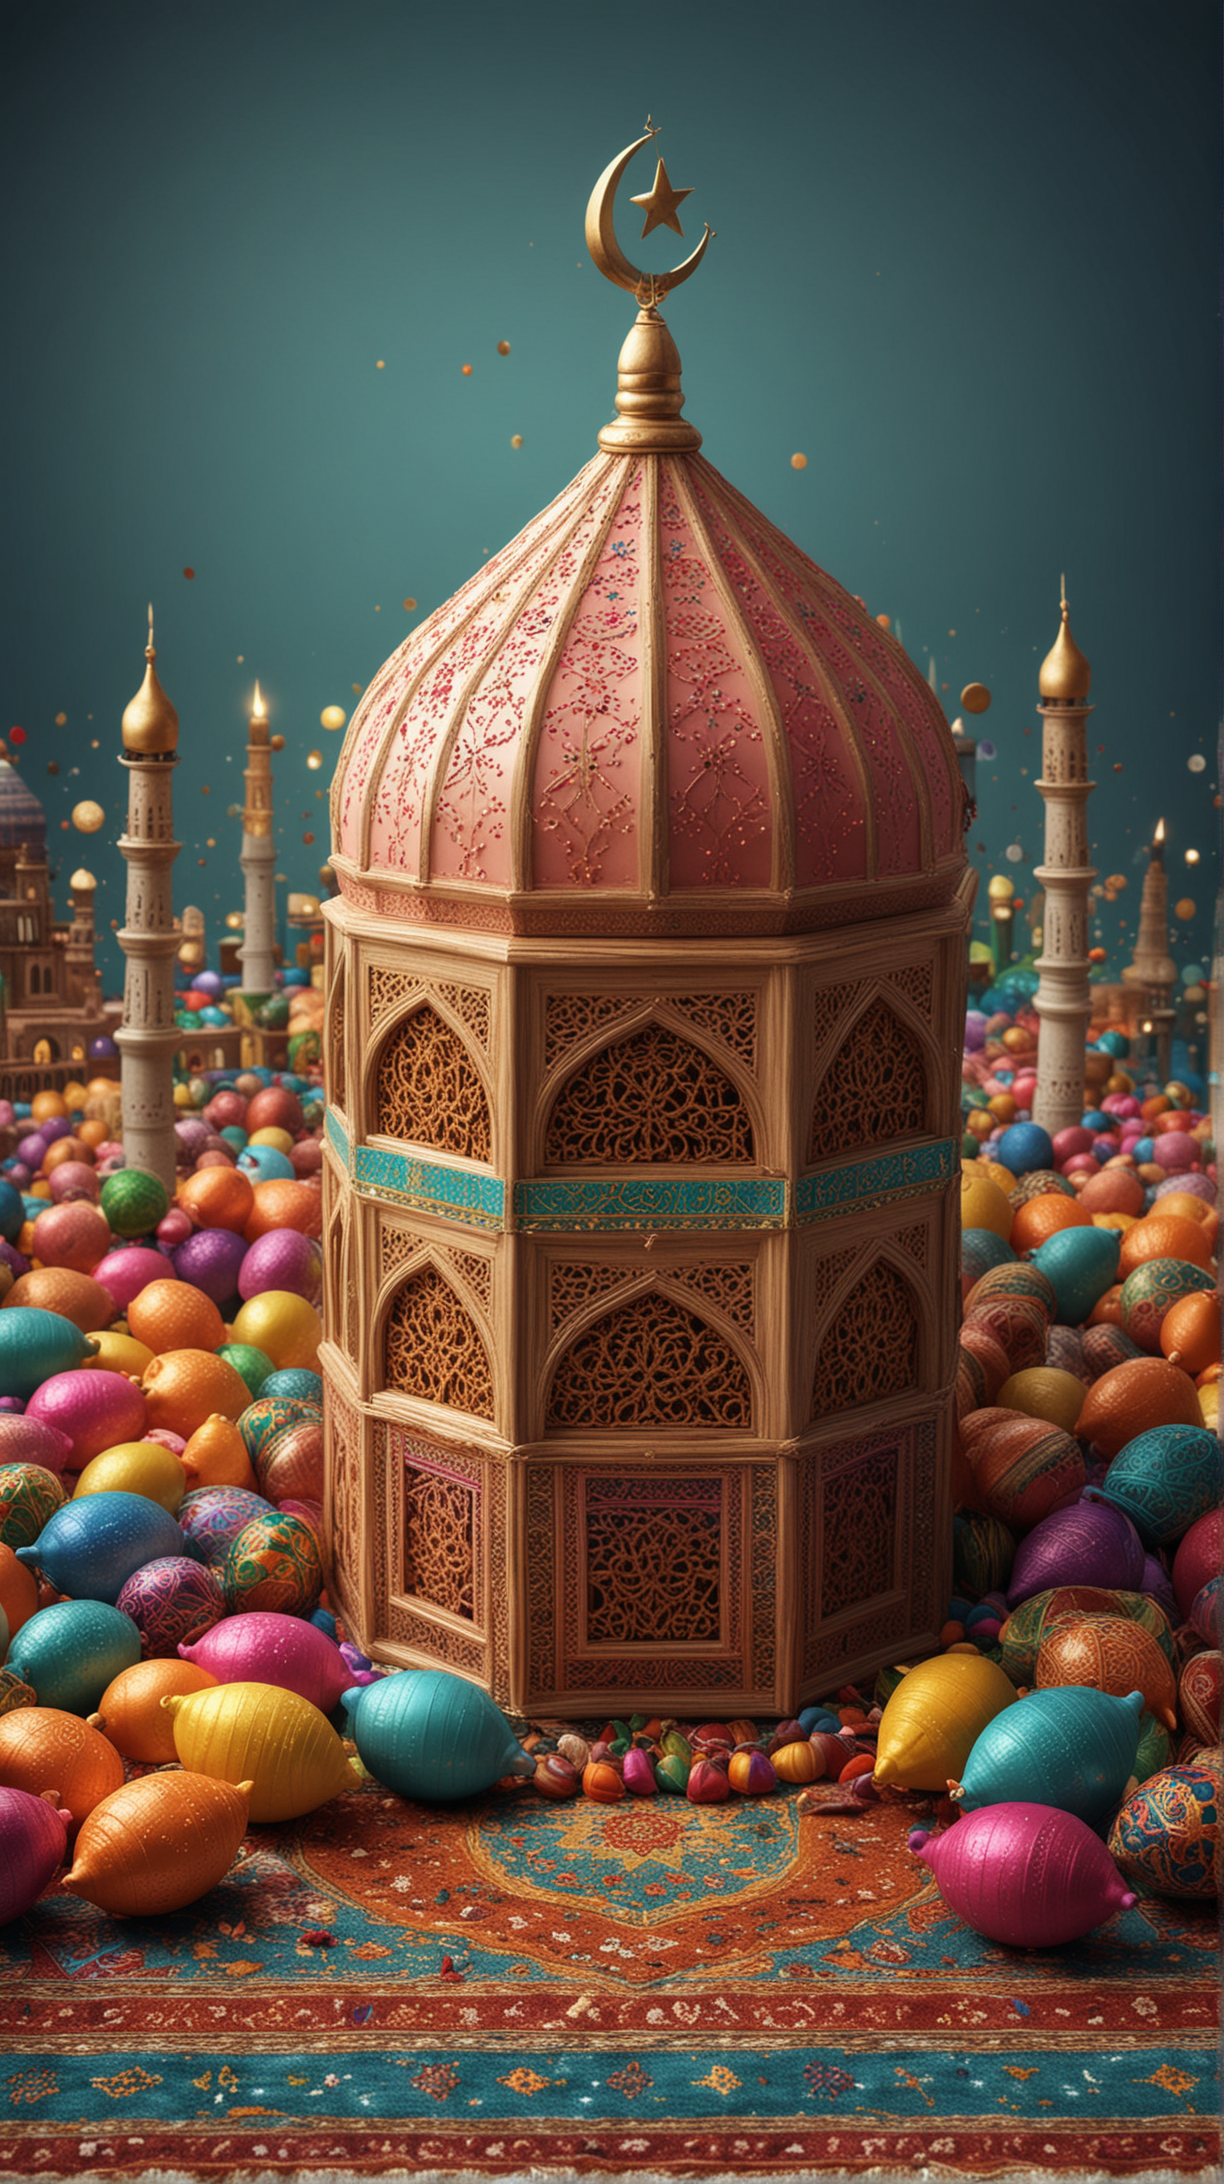 A vibrant celebration of Eid al-Fitr or Eid al-Adha, with colorful decorations, festive gatherings, and joyful expressions of faith, marking the culmination of Ramadan or the commemoration of Abraham's sacrifice, respectively. Hyper realistic